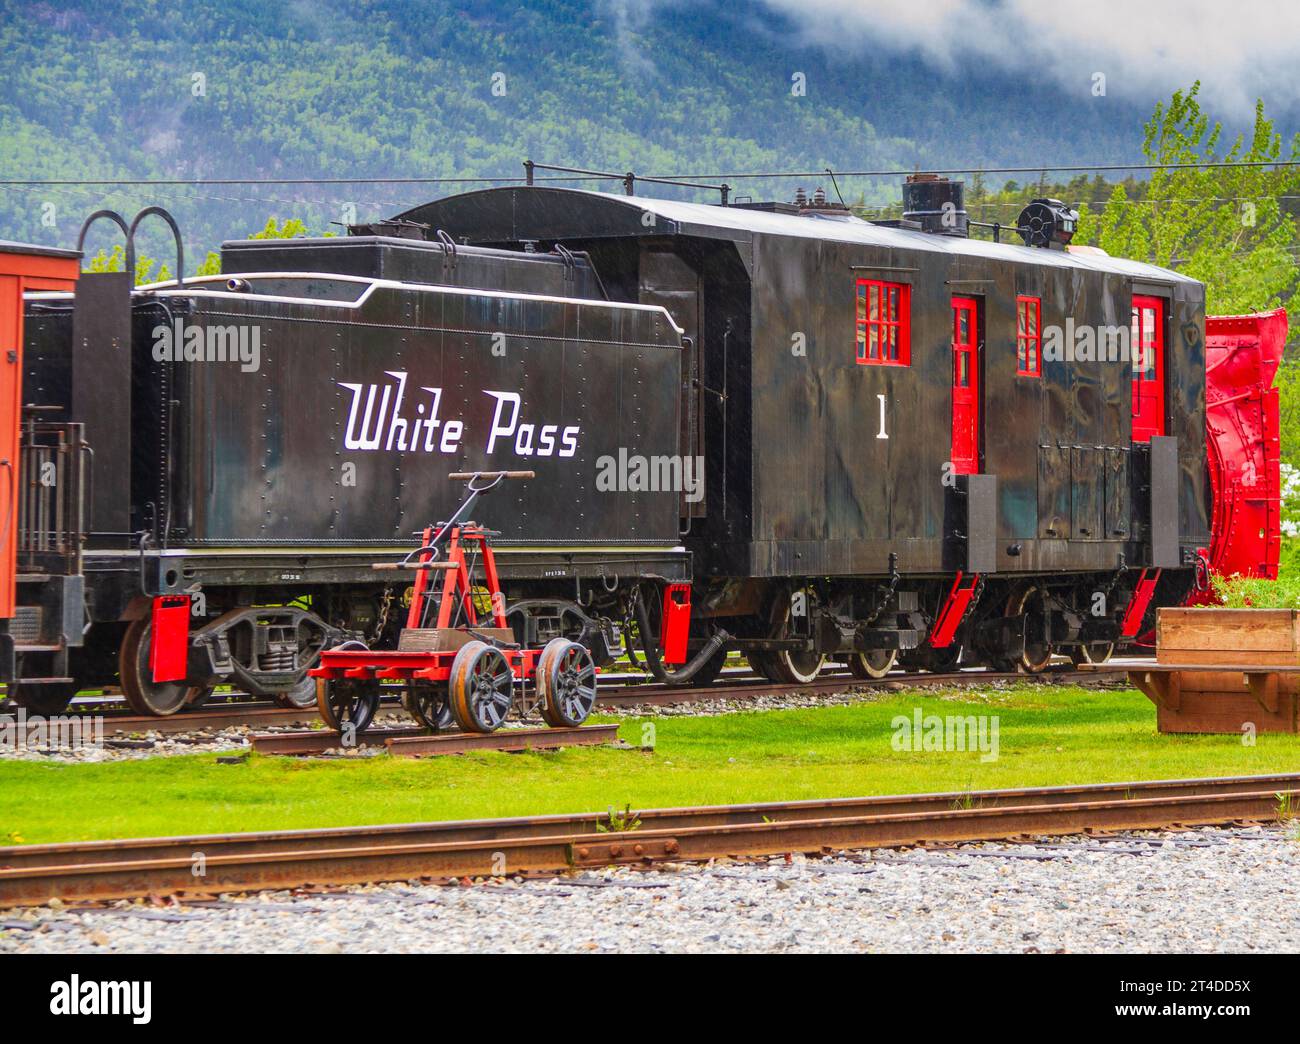 White Pass and Yukon Route Railroad train station depot in Skagway, Alaska. The scenic train ride available on this line over the White Pass mountain Stock Photo